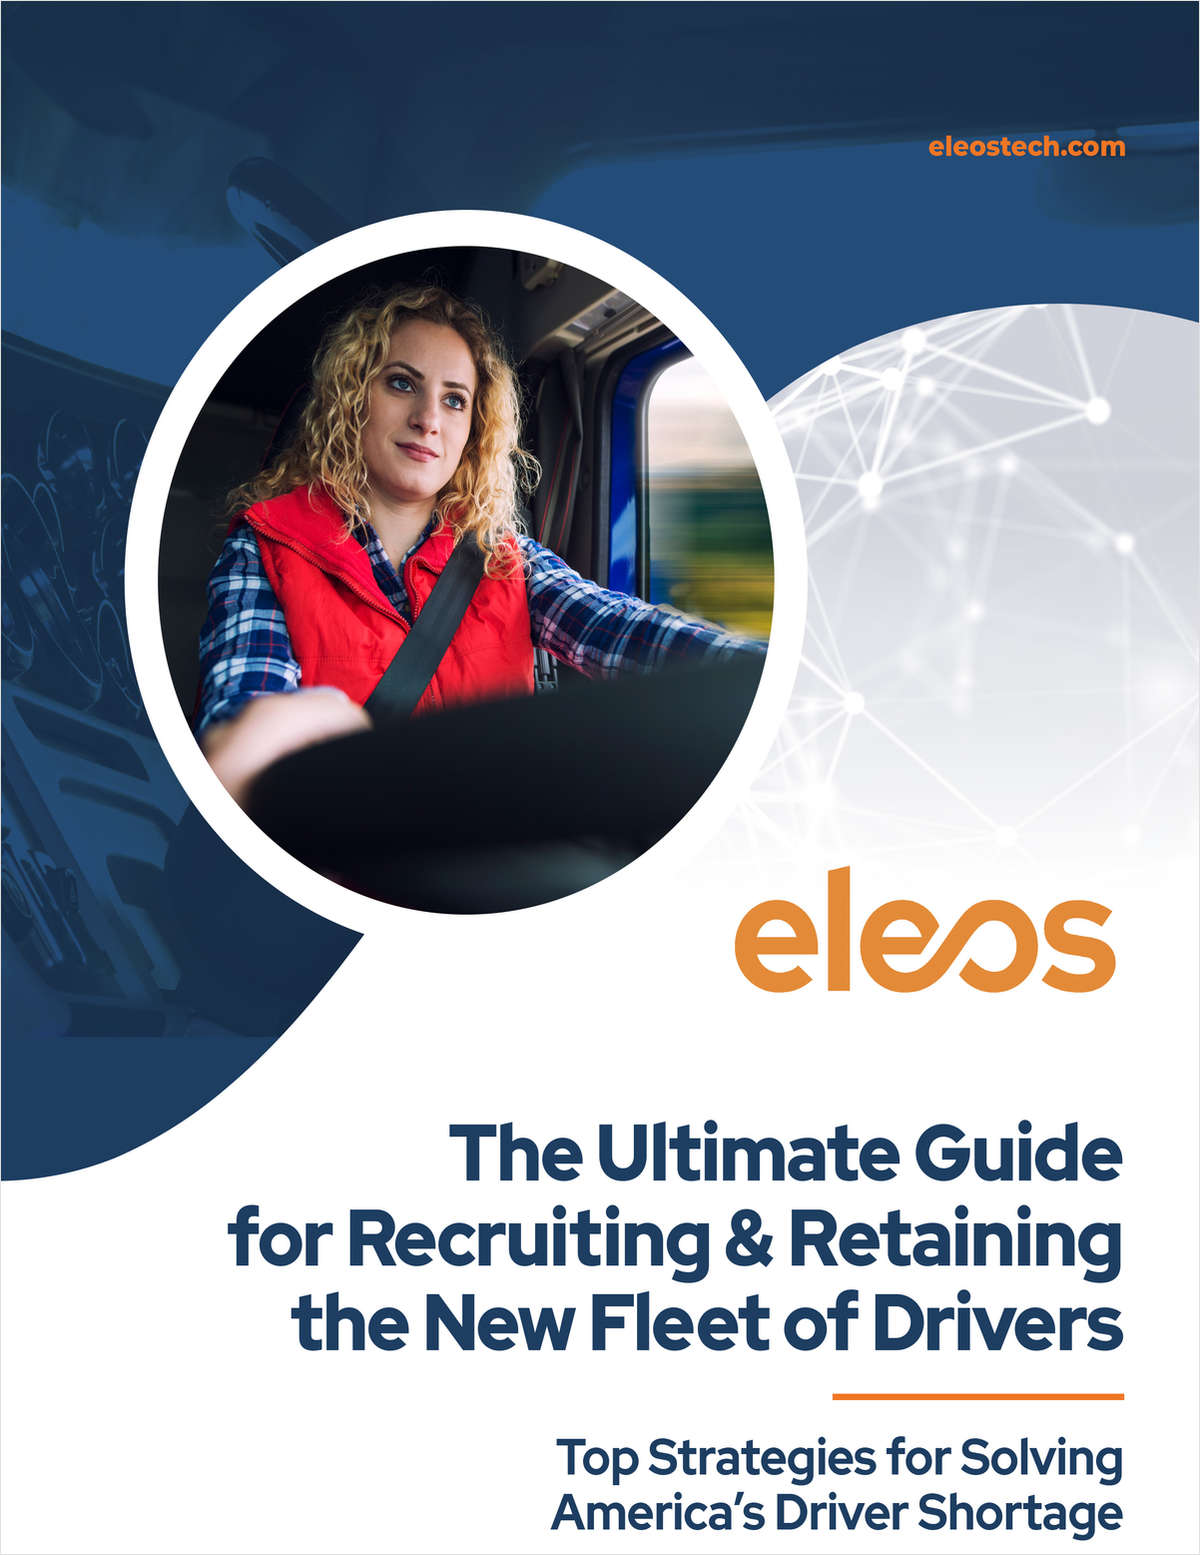 The Ultimate Guide for Recruiting & Retaining the New Fleet of Drivers